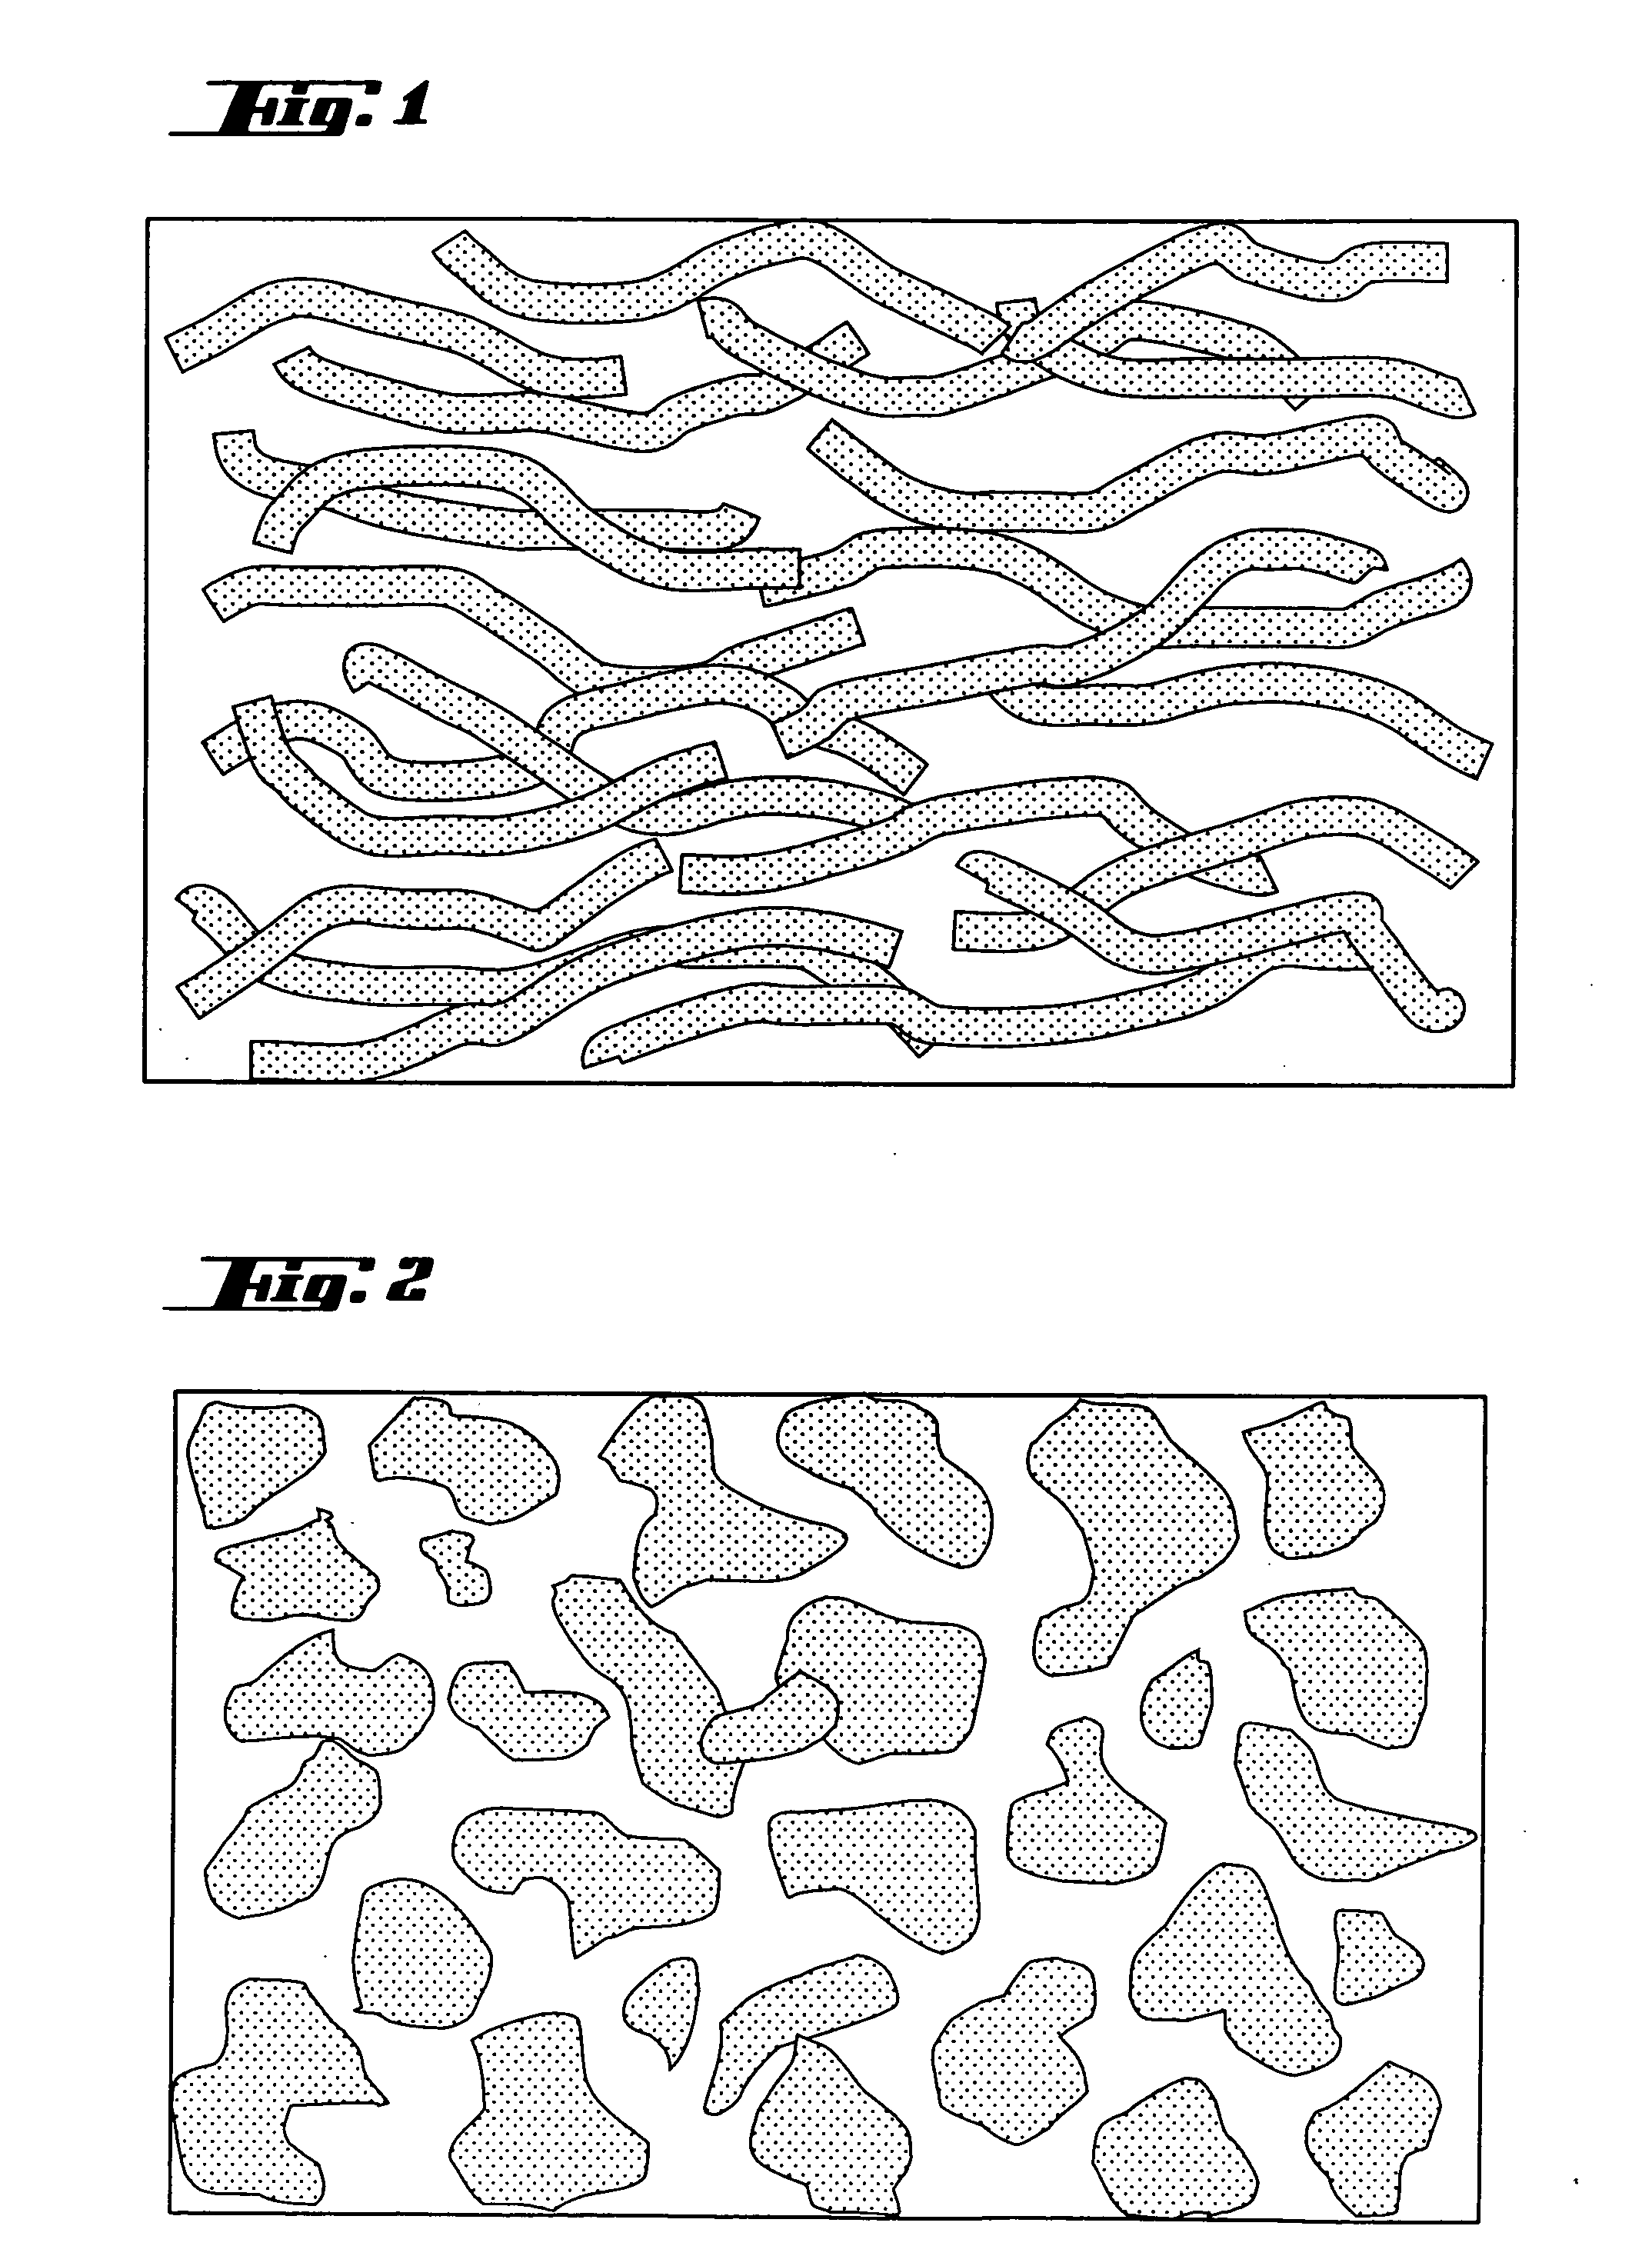 Coated semiconductor wafer, and process and apparatus for producing the semiconductor wafer